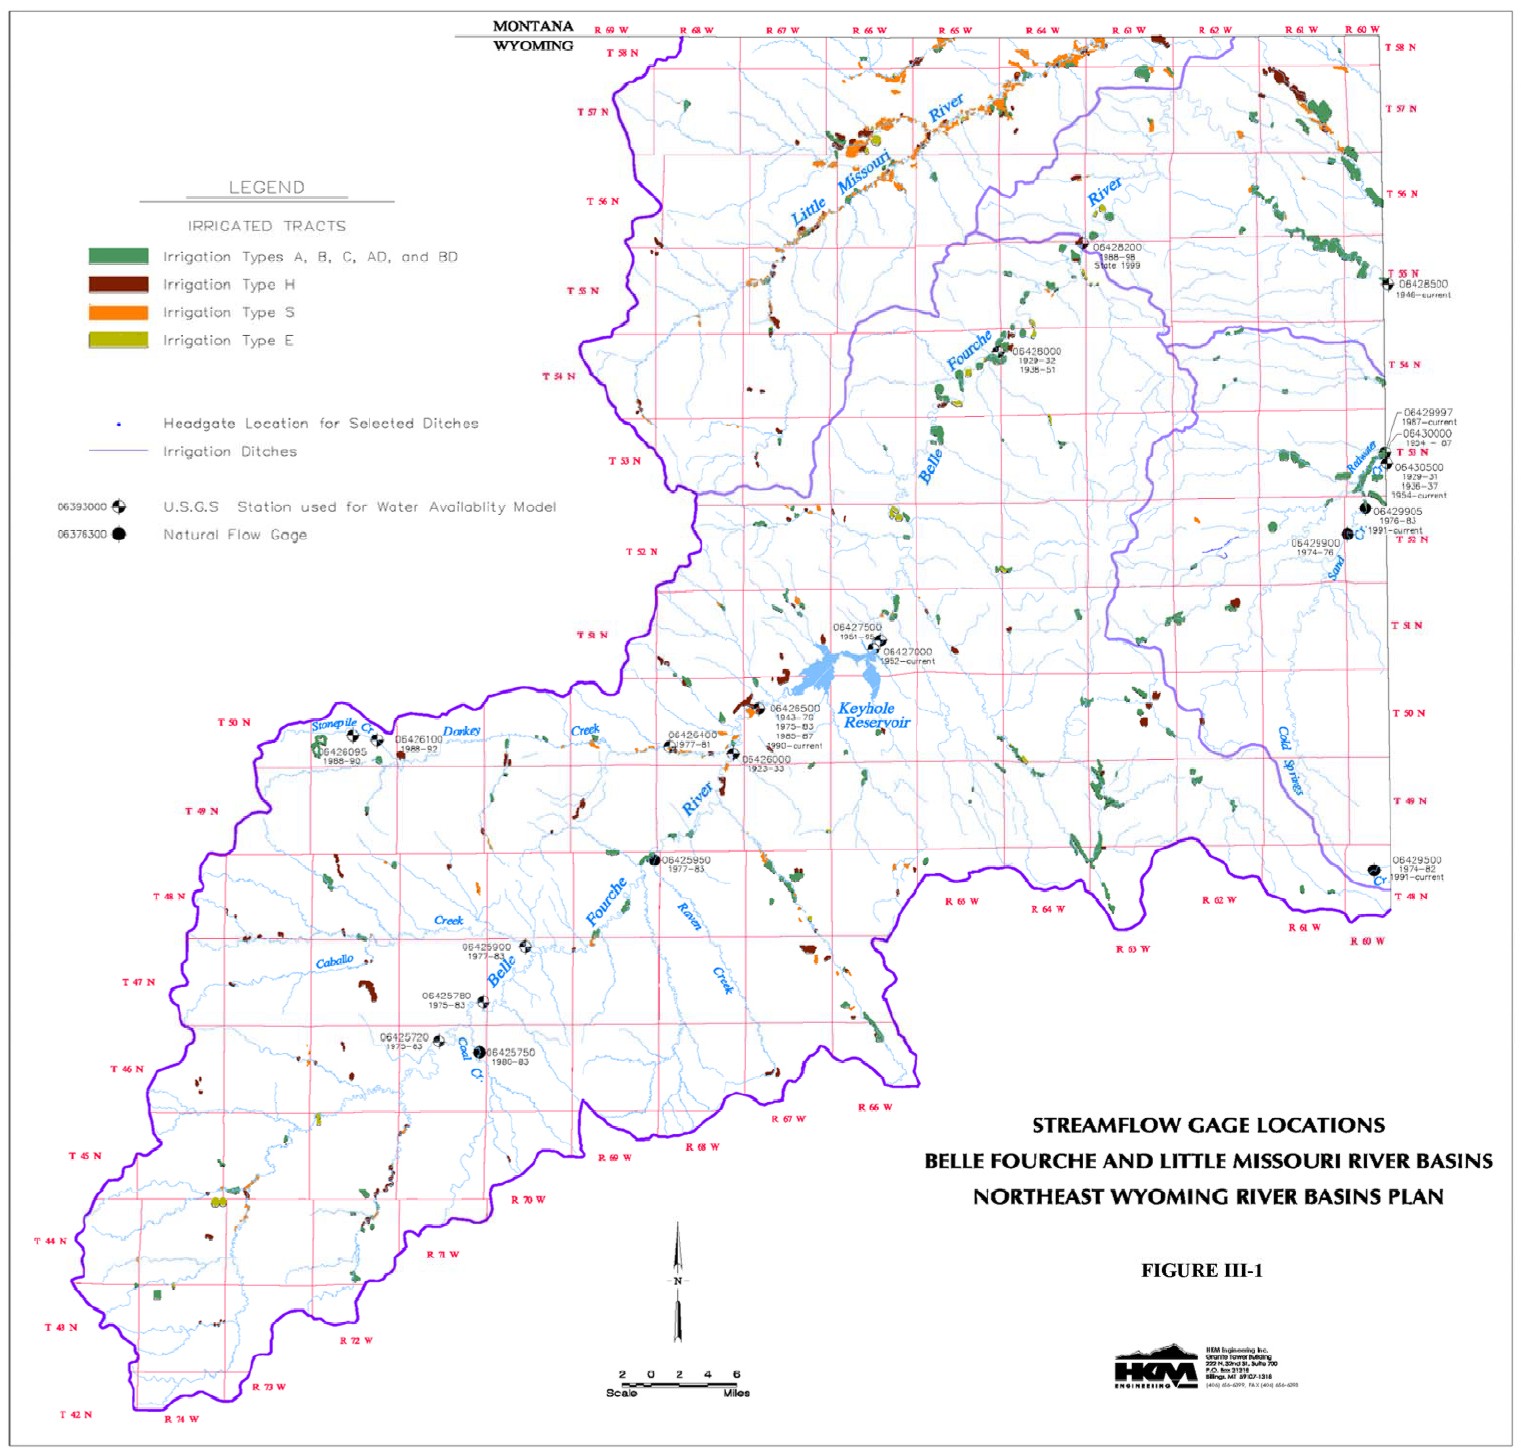 Stream flow discharge (cfs) is estimated by multiplying the water's